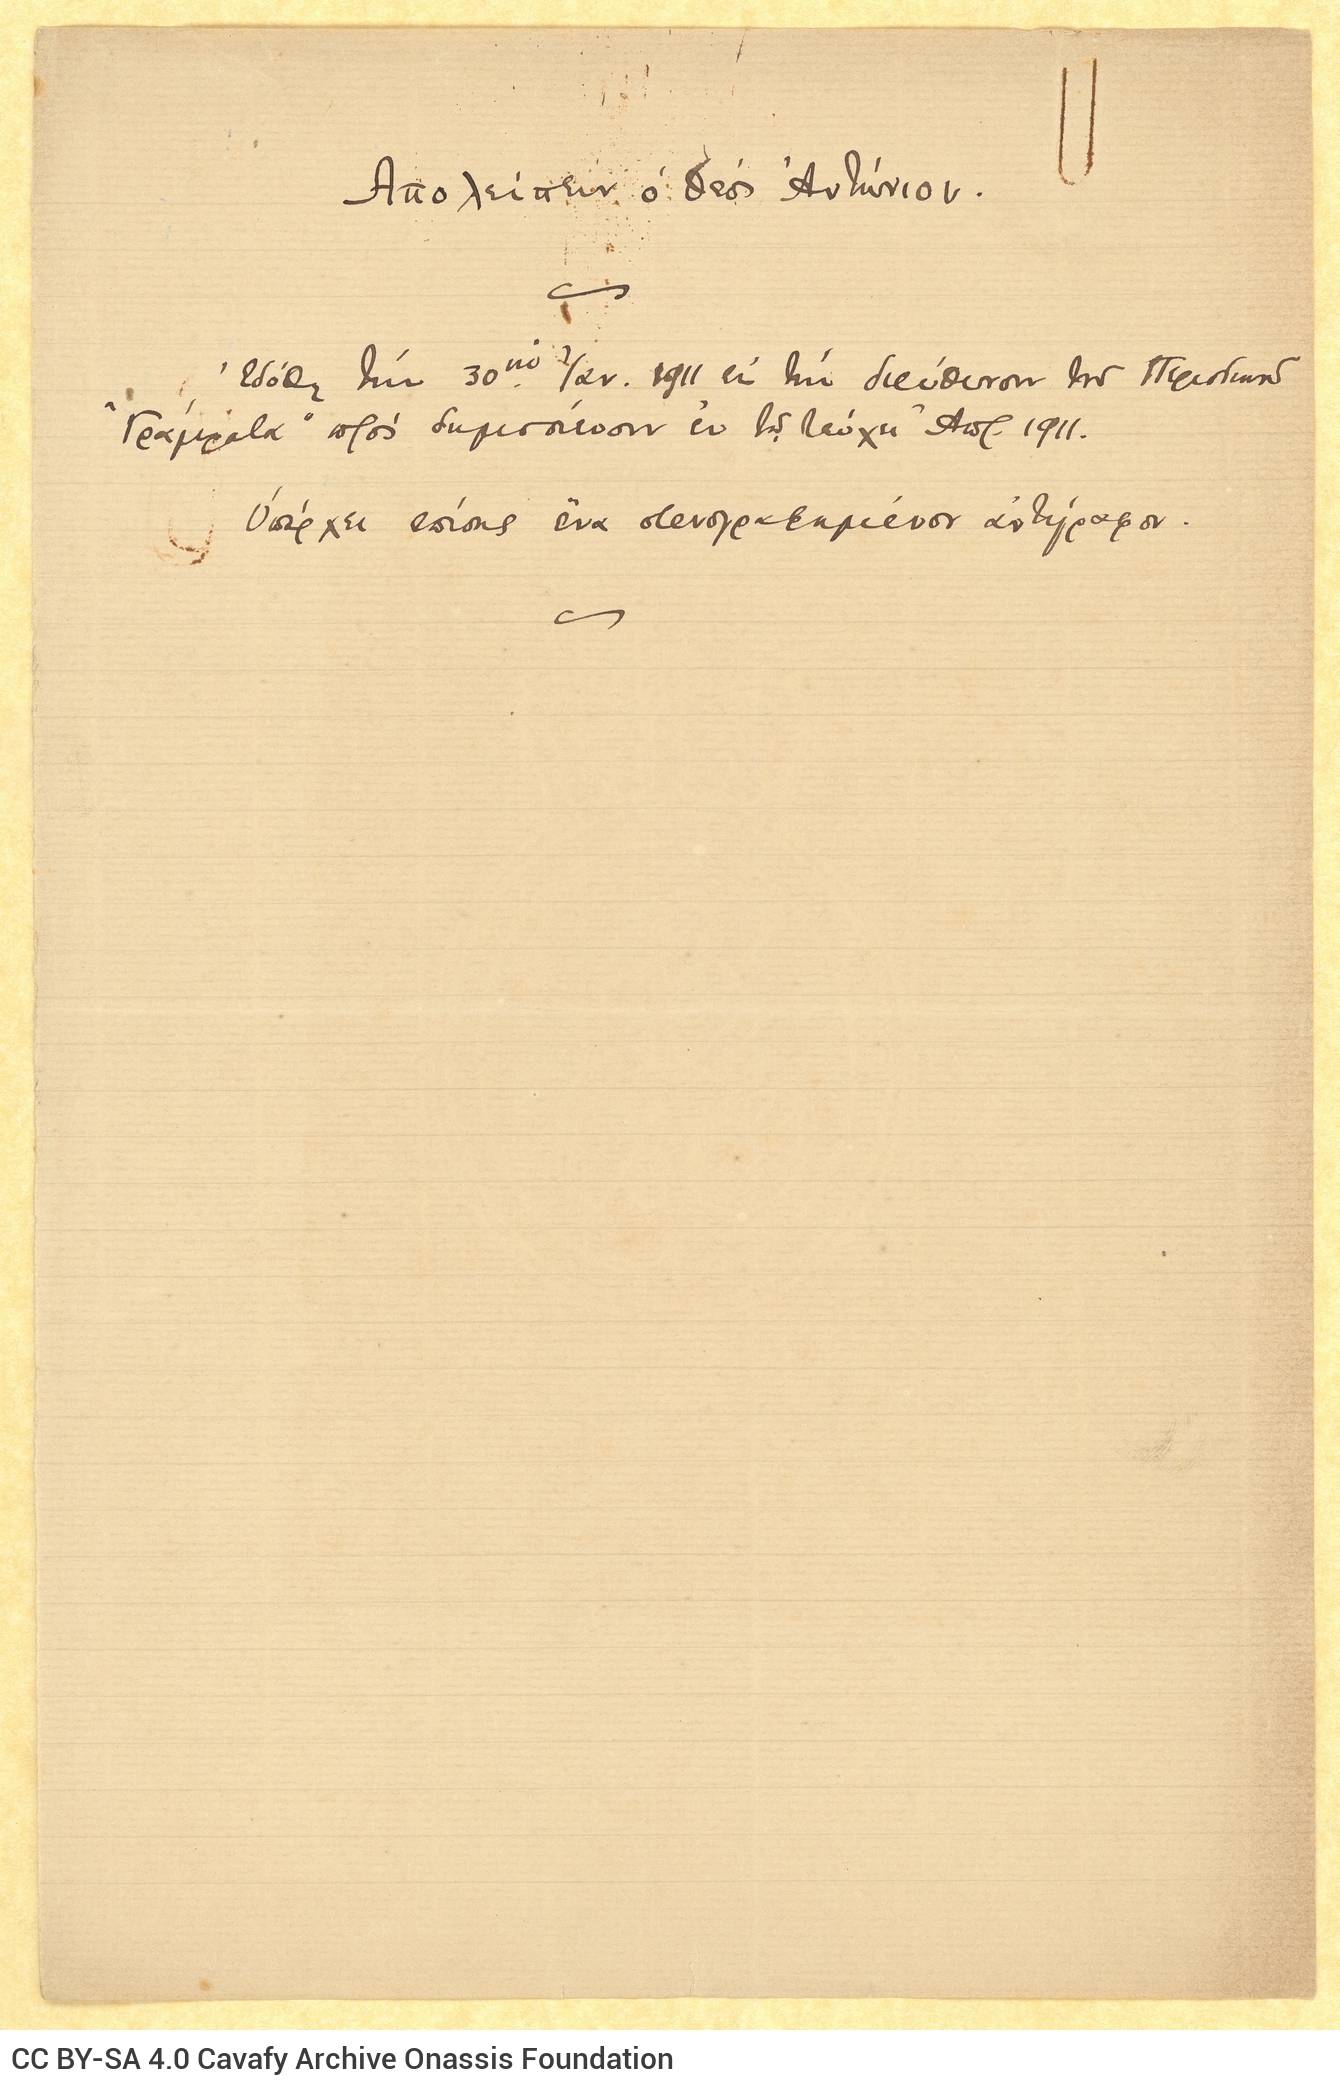 Handwritten note on one side of a ruled sheet, regarding the publication of the poem "The God Abandons Antony" in the issu